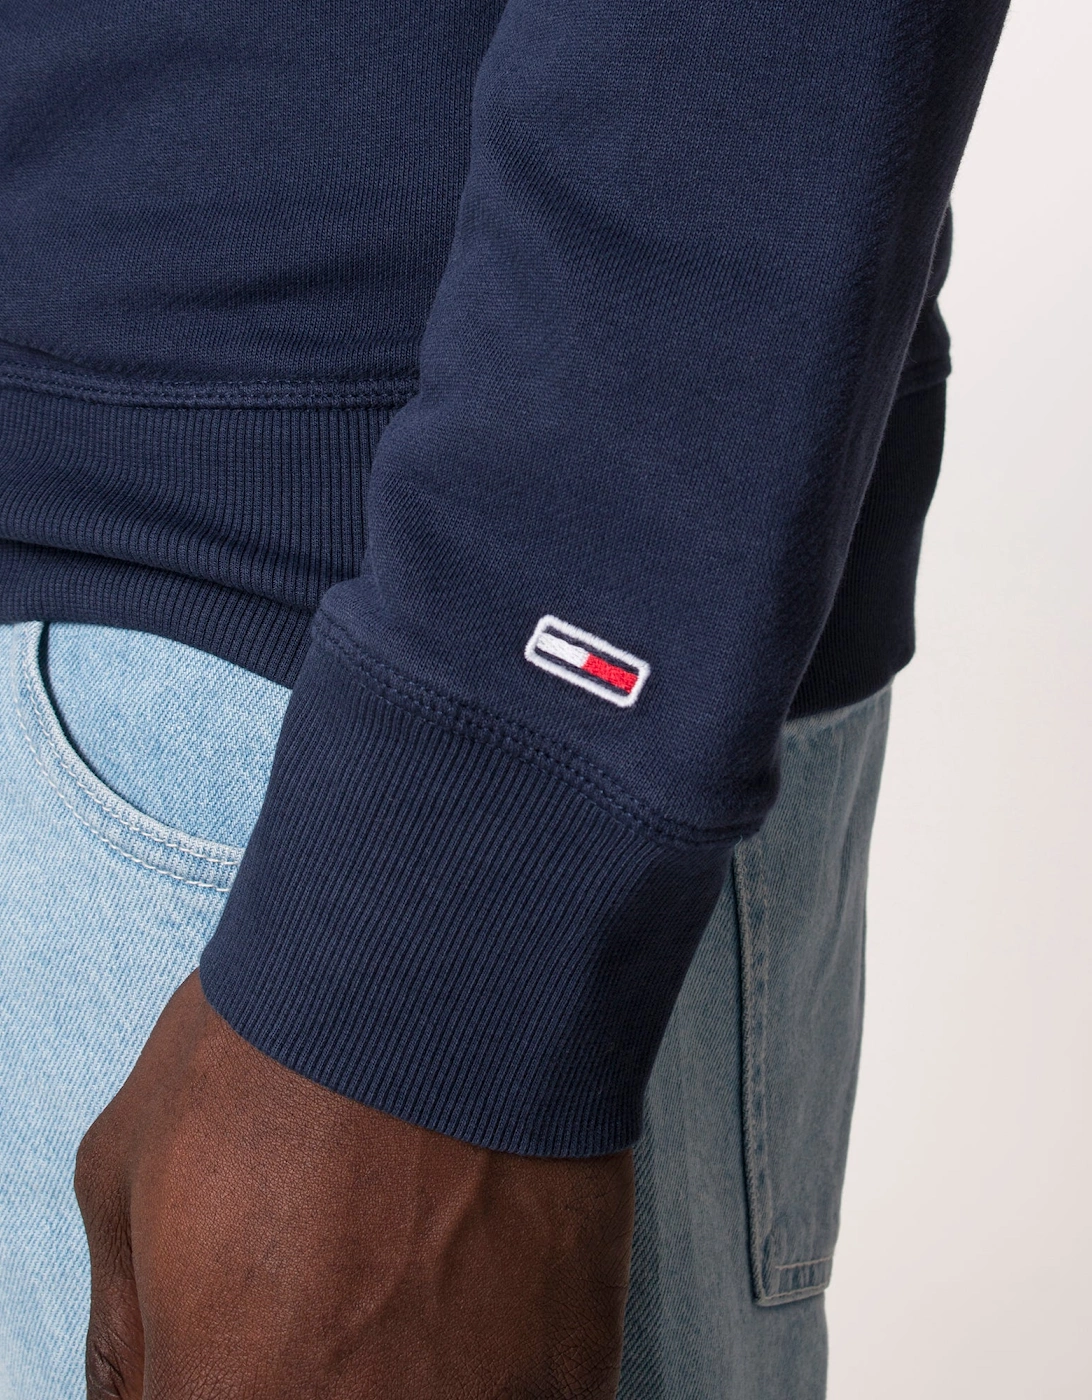 Relaxed Fit Timeless Tommy Hoodie